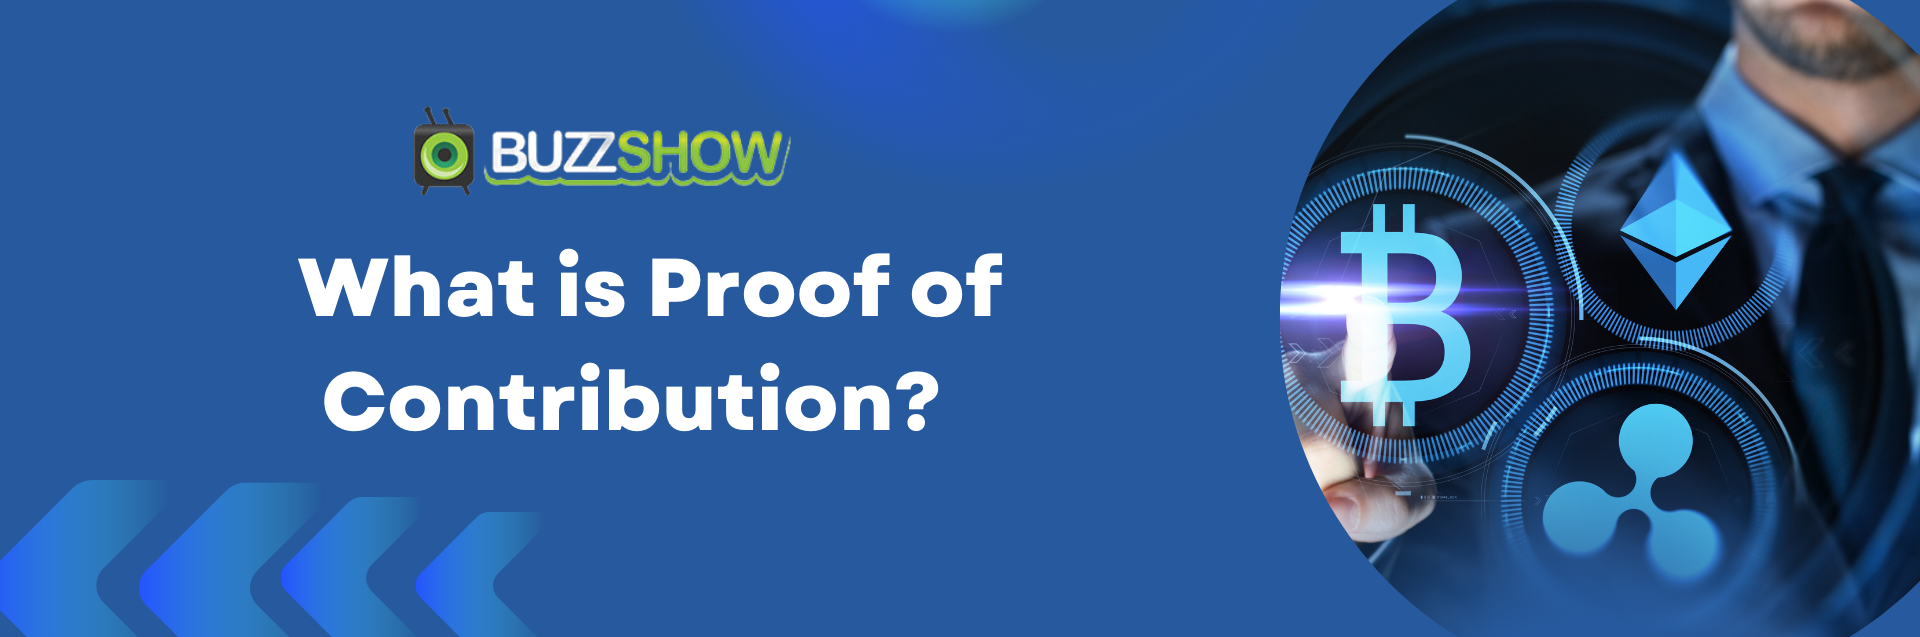 What is Proof of Contribution?